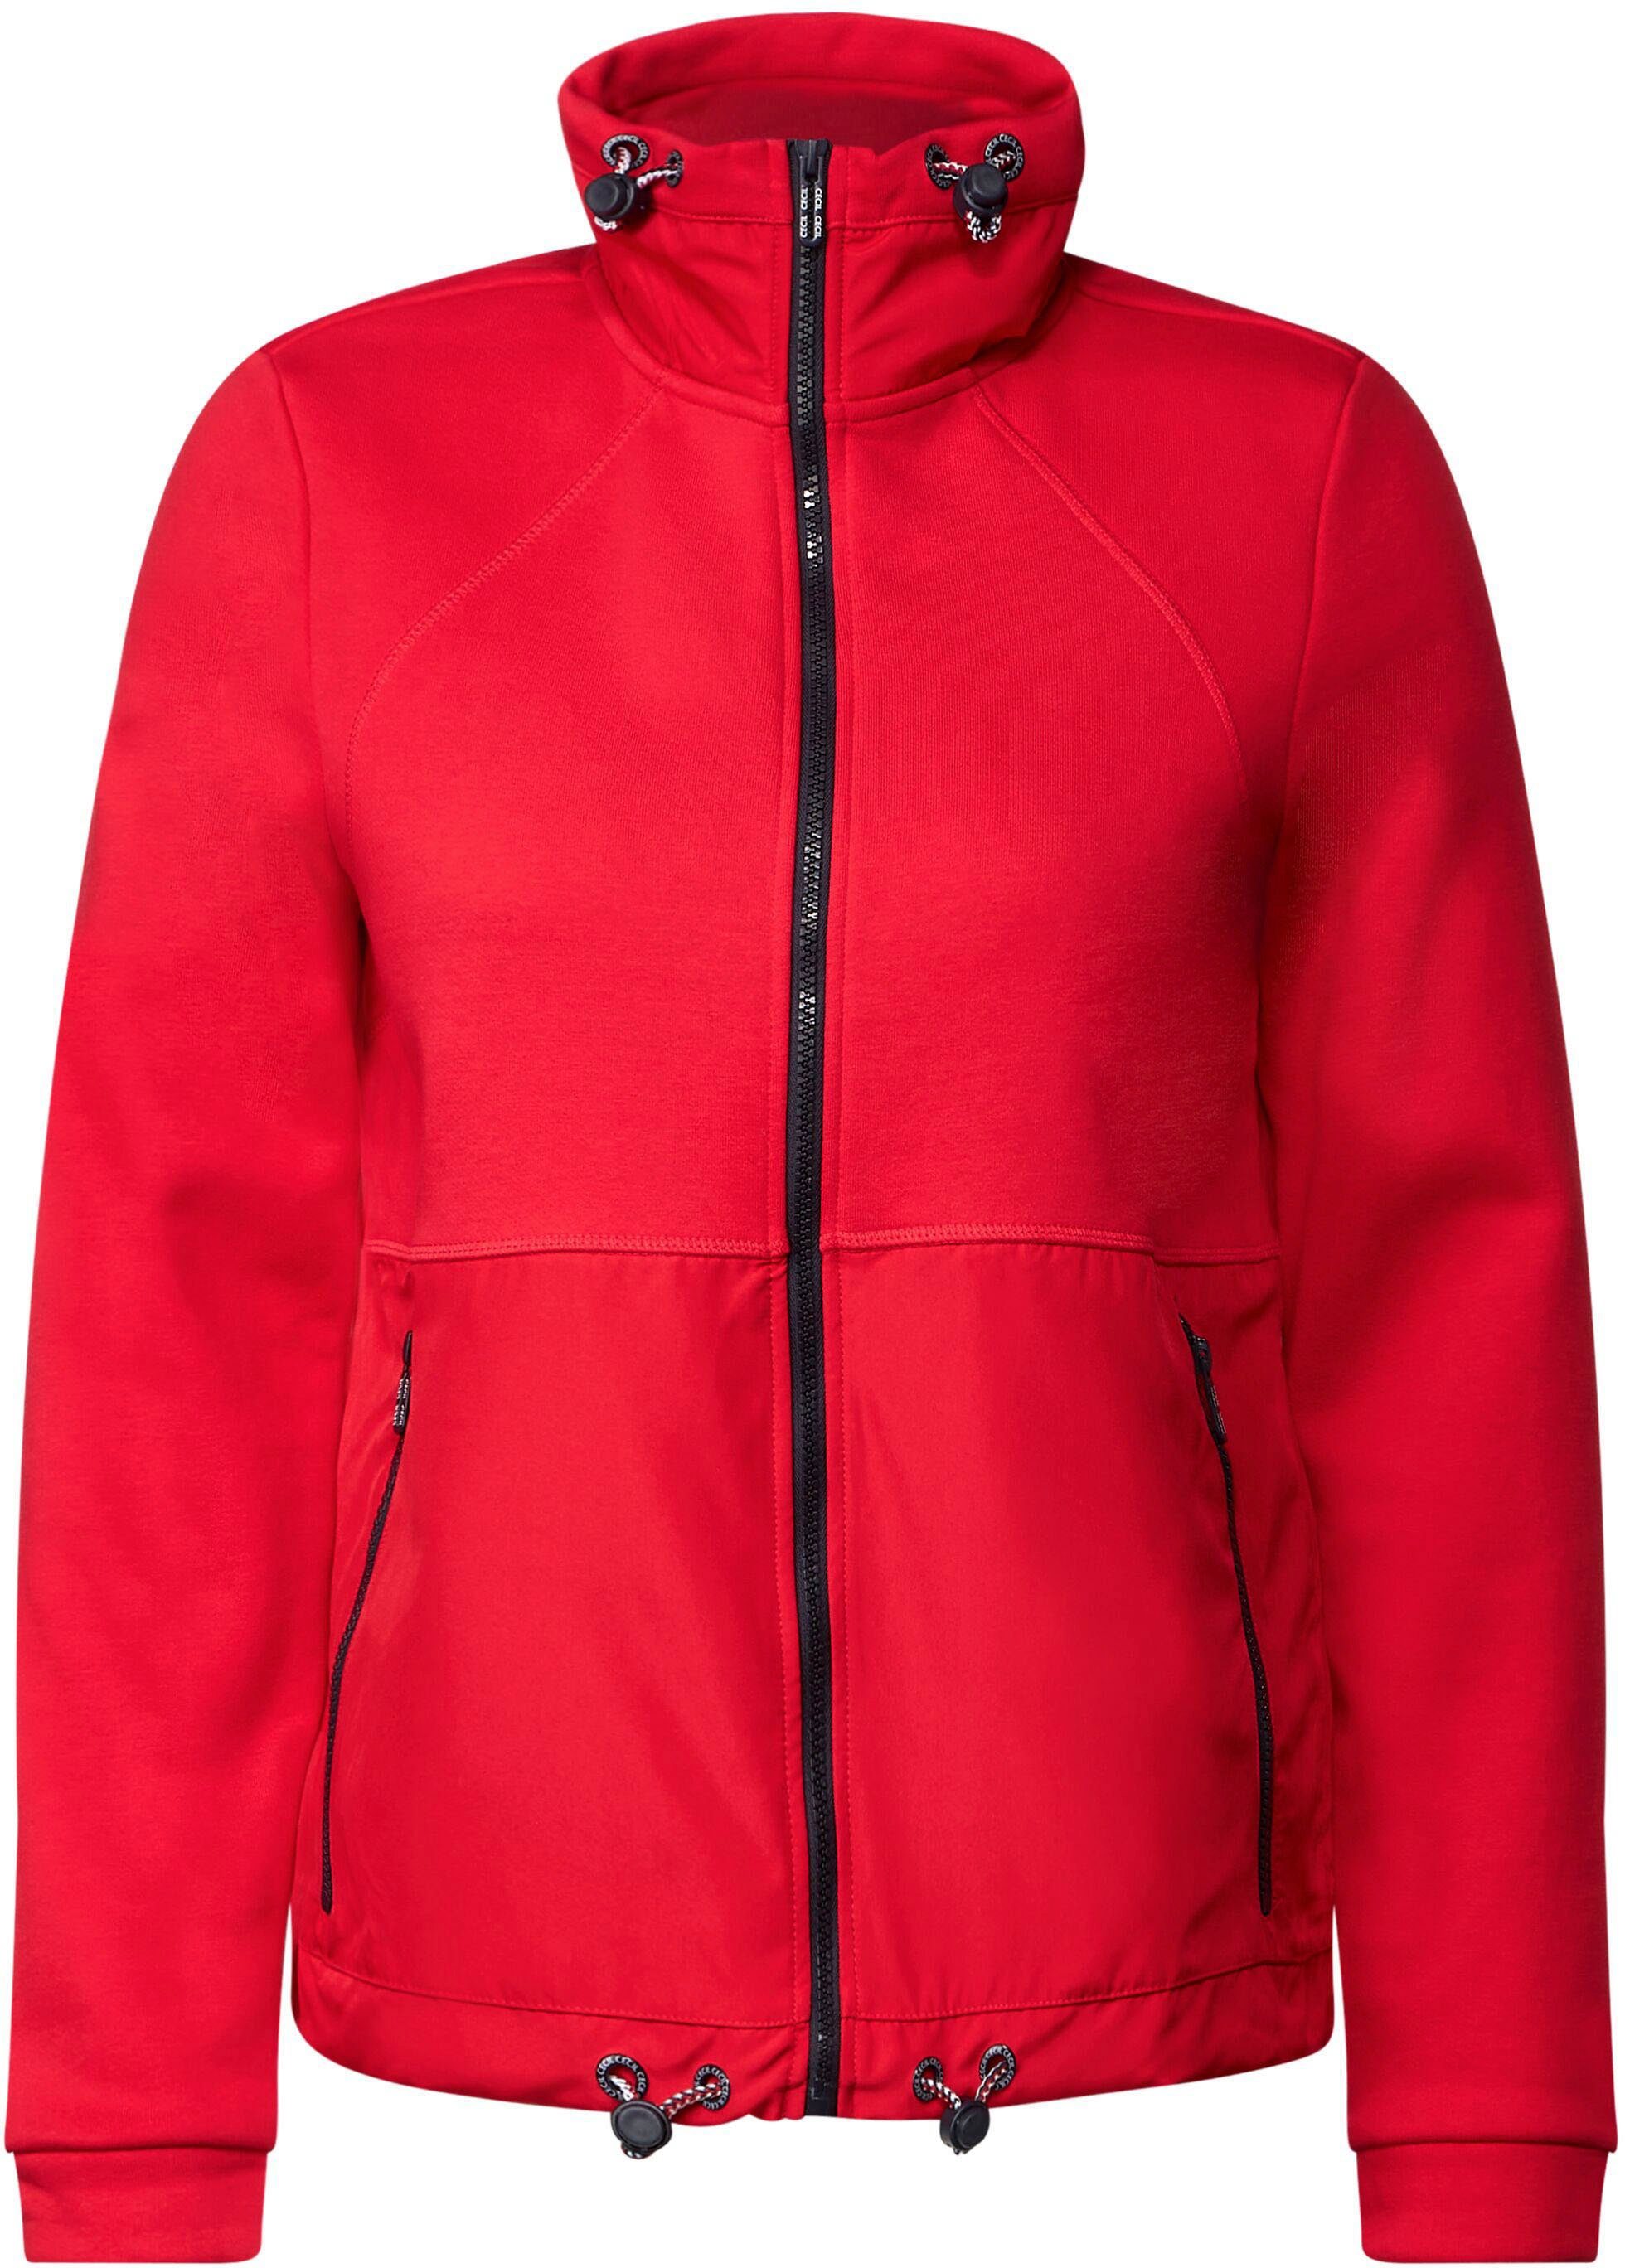 Sweatjacke strong Materialmix Cecil red im modernen